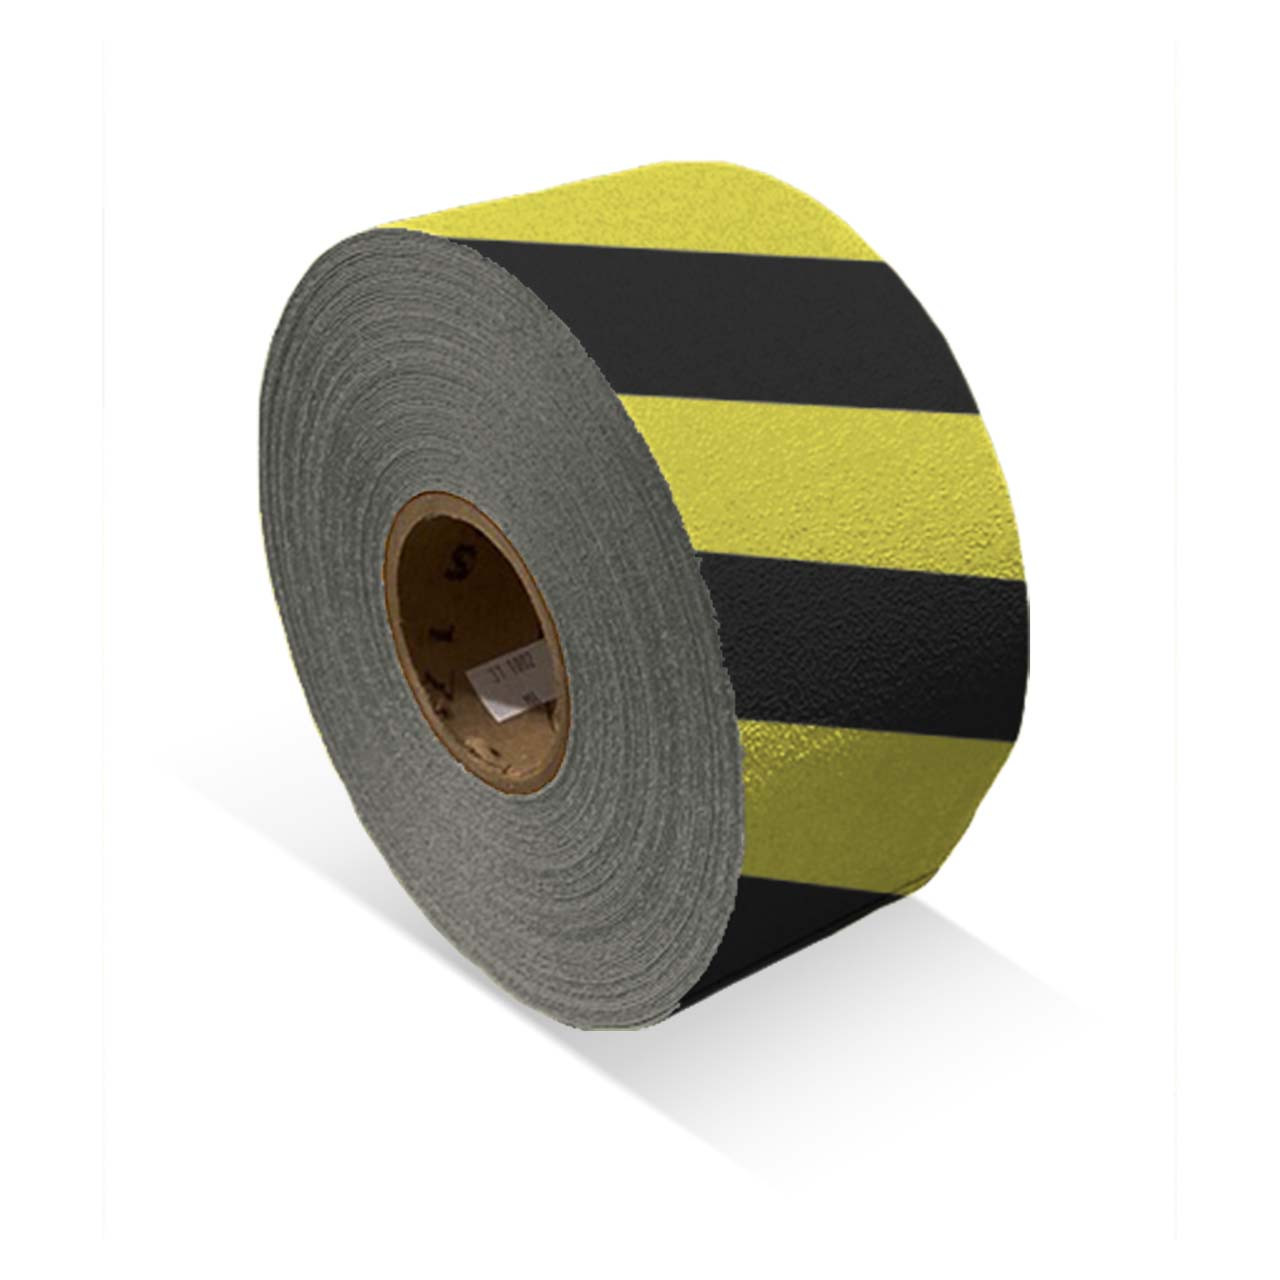 Non Skid Tape- Colored 60 Grit, 2 Wide